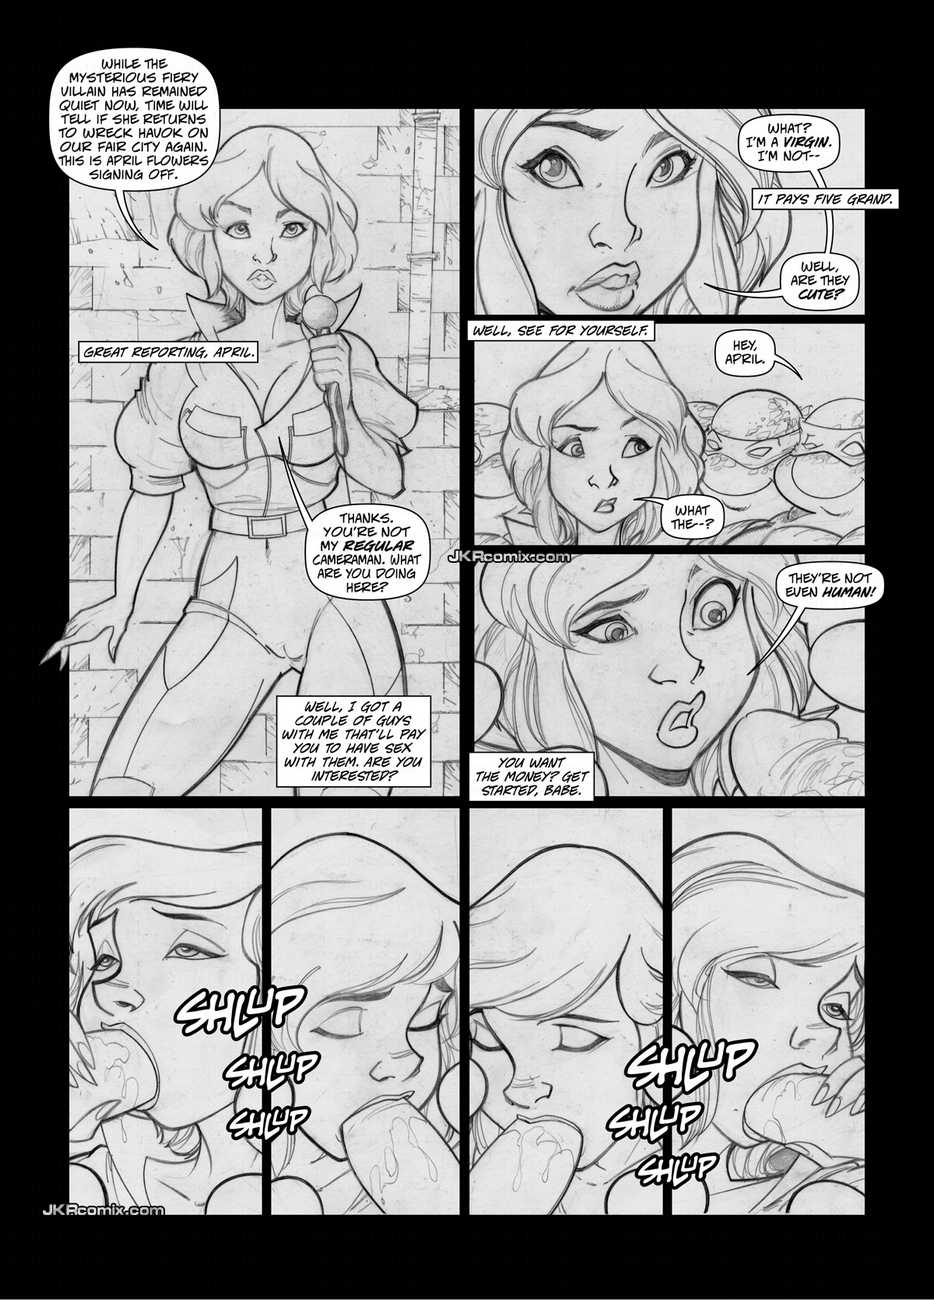 The Moneymaker 8 page 2